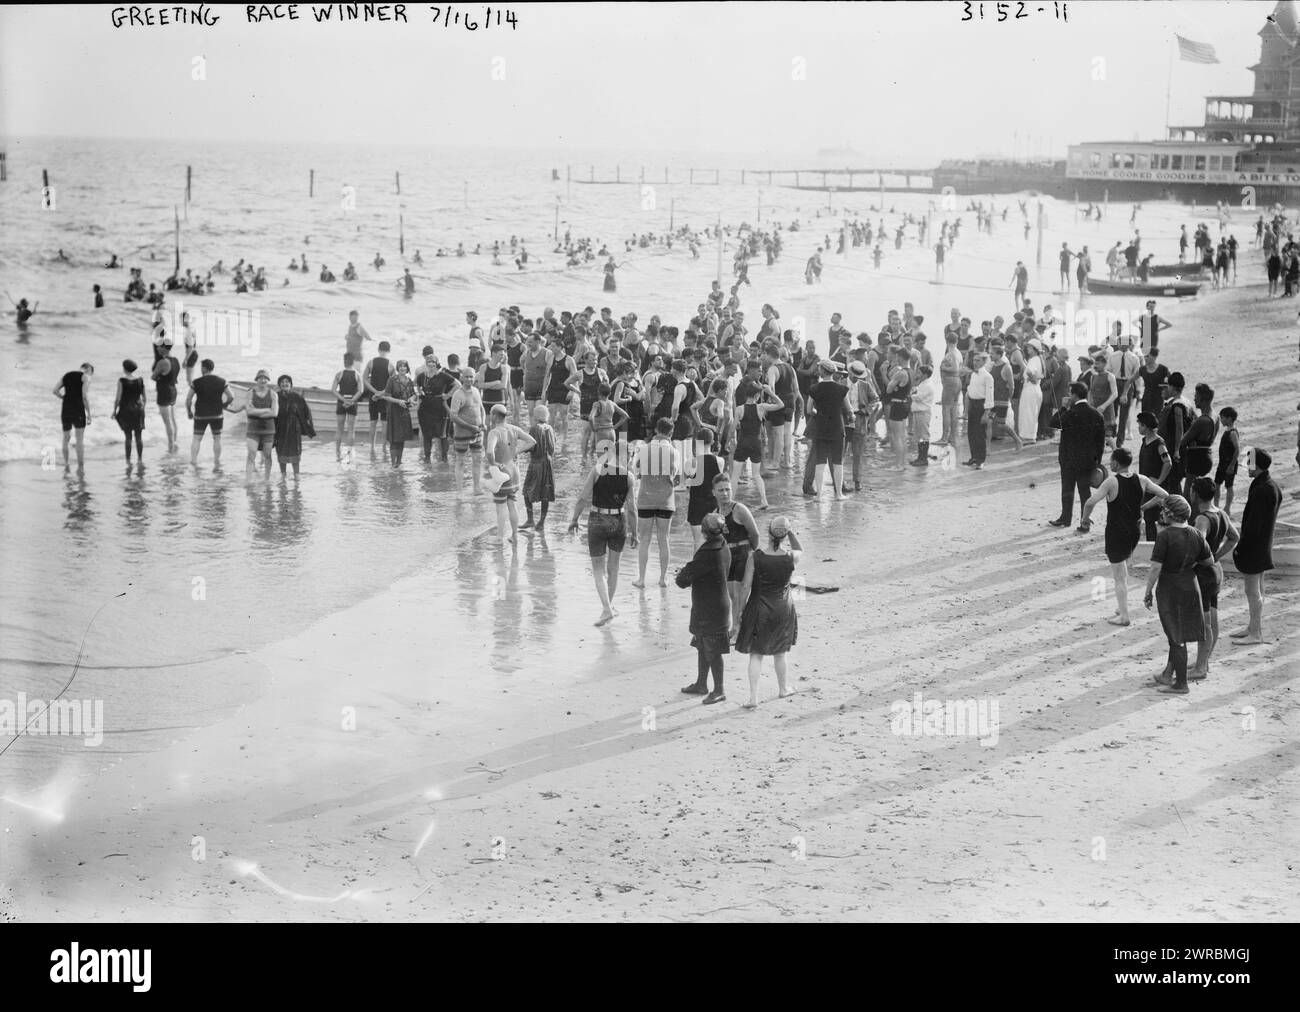 Greeting race winner, 7/16/14, Photograph shows a women's swimming contest, Sheepshead Bay, Brooklyn, New York which was held on July 16, 1914., 7/16/14, Glass negatives, 1 negative: glass Stock Photo